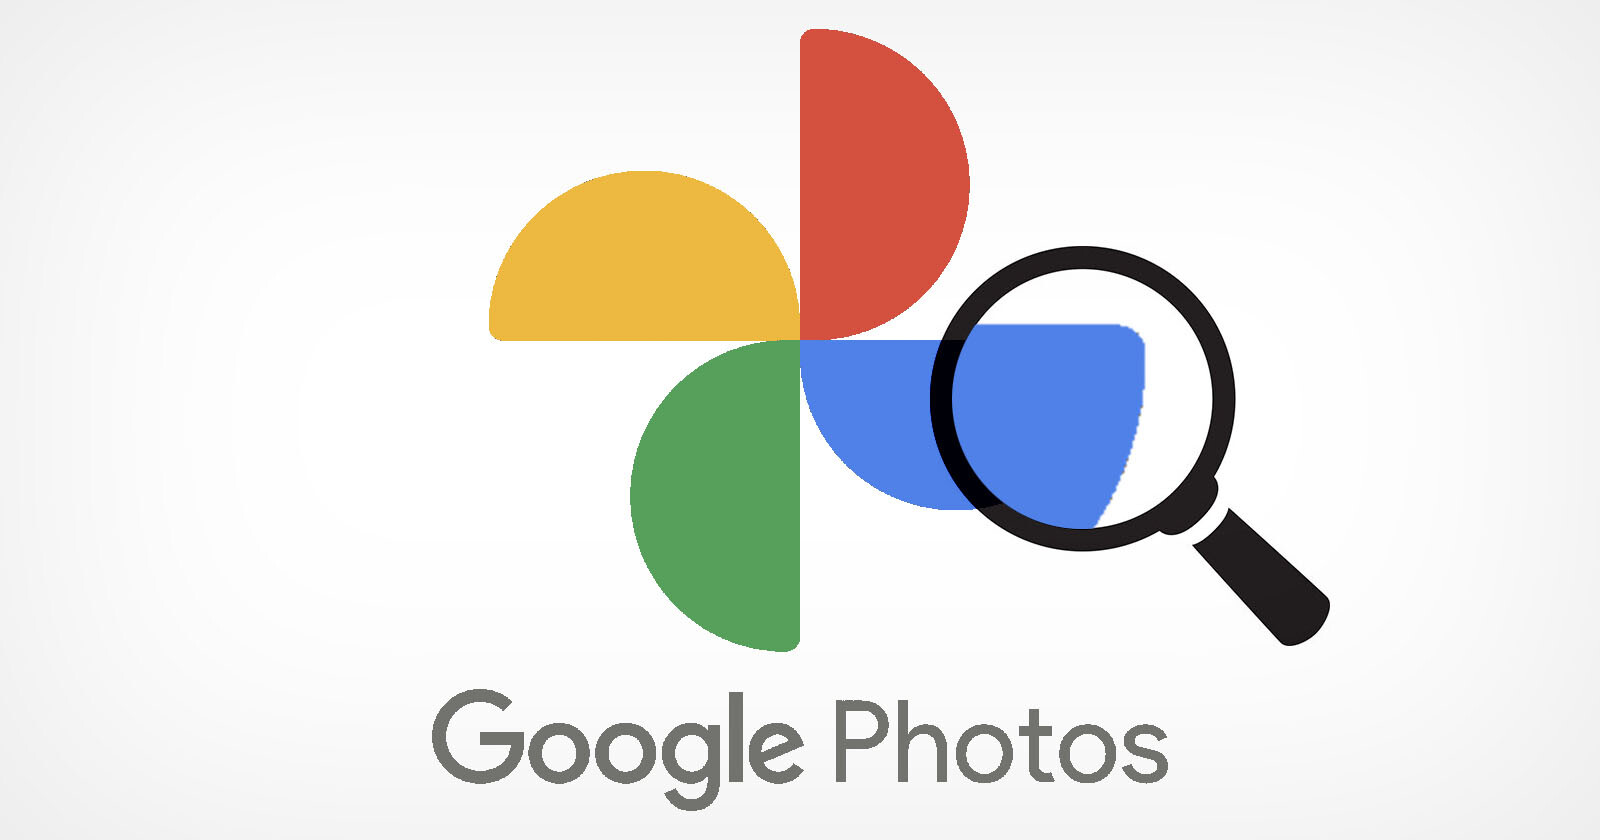  google photos can now facially recognize people from 